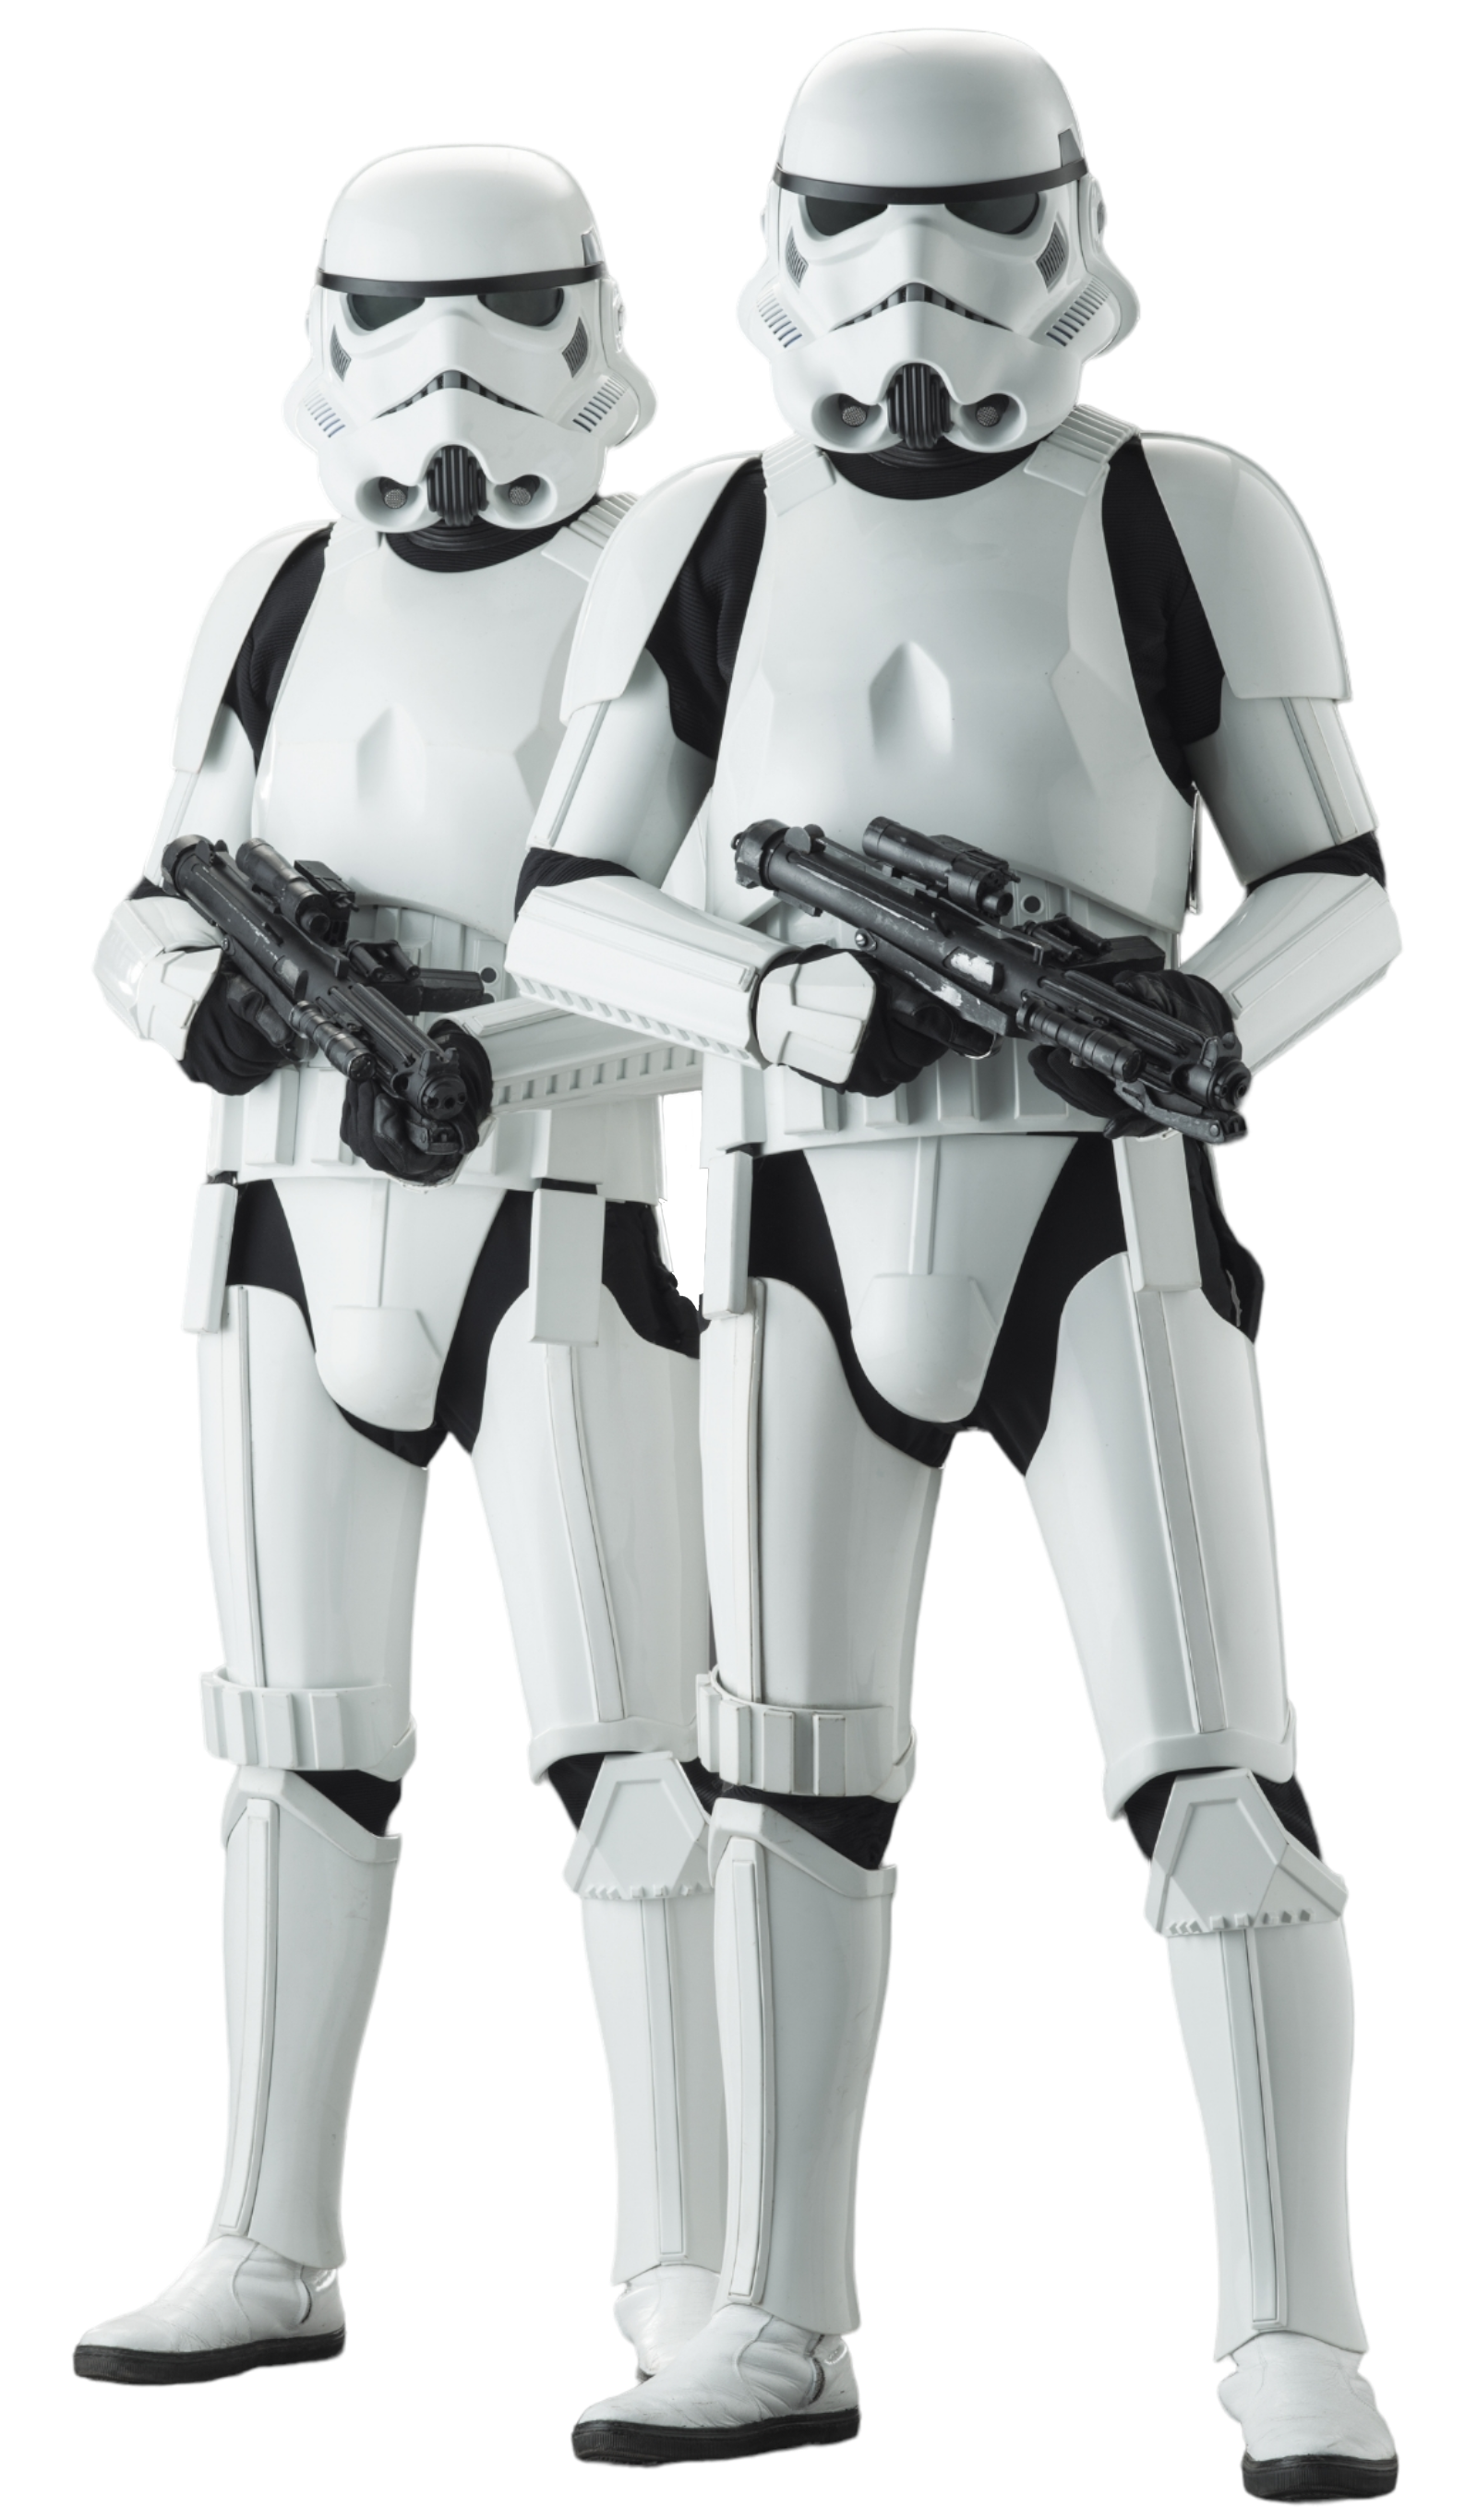 https://static.wikia.nocookie.net/starwars/images/d/df/Stormtroopers-ROOCE.png/revision/latest?cb=20230222043826